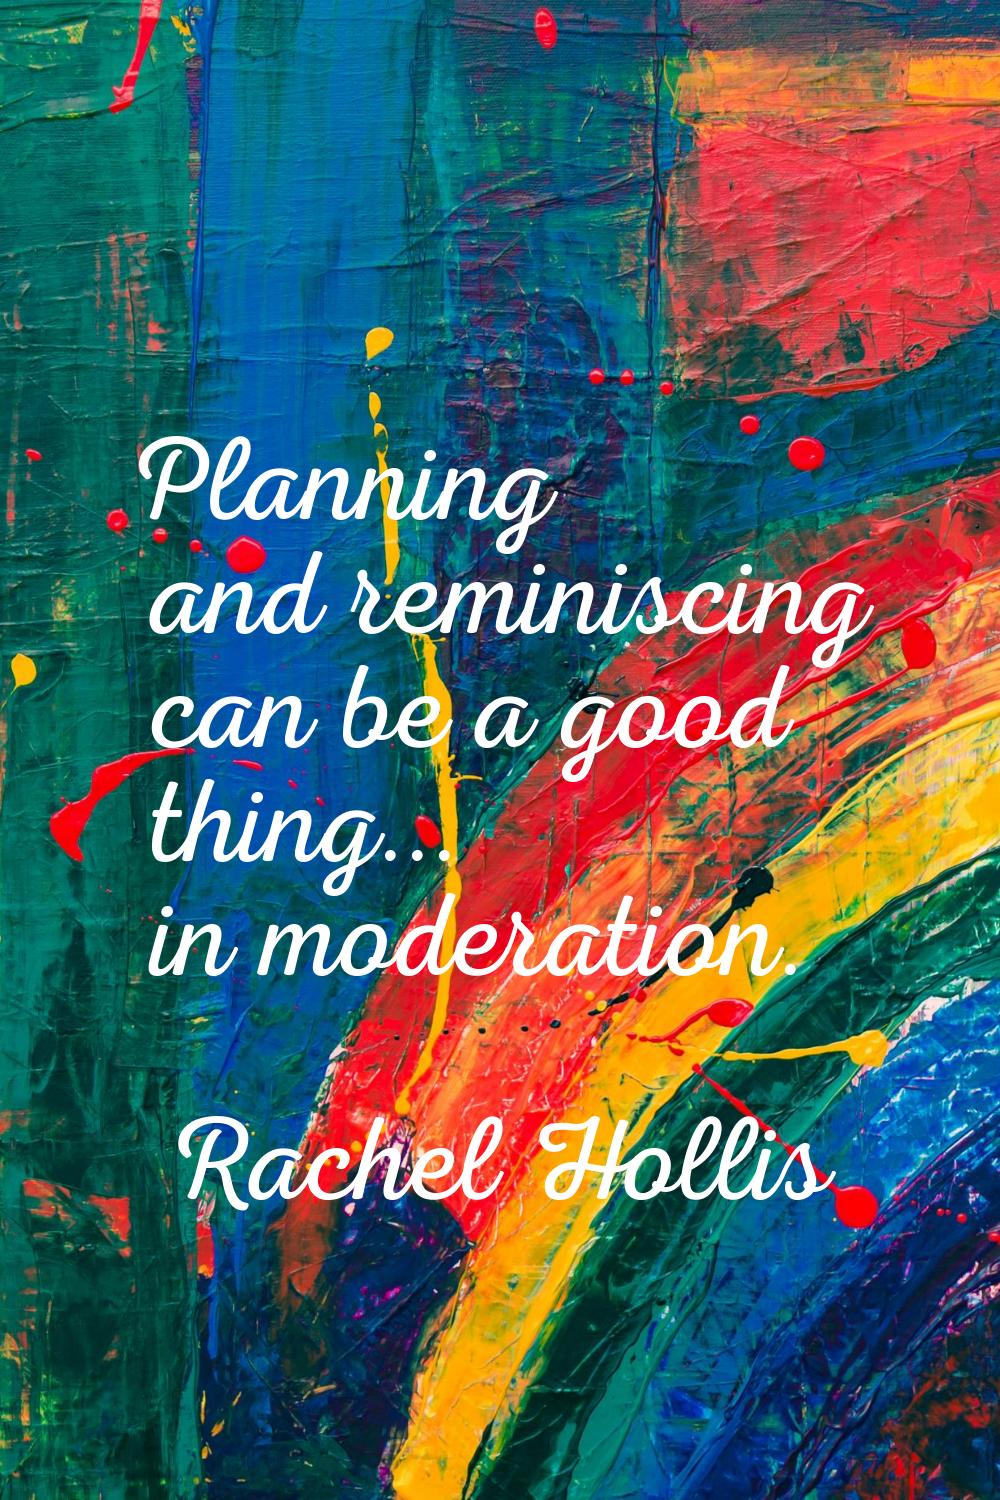 Planning and reminiscing can be a good thing... in moderation.